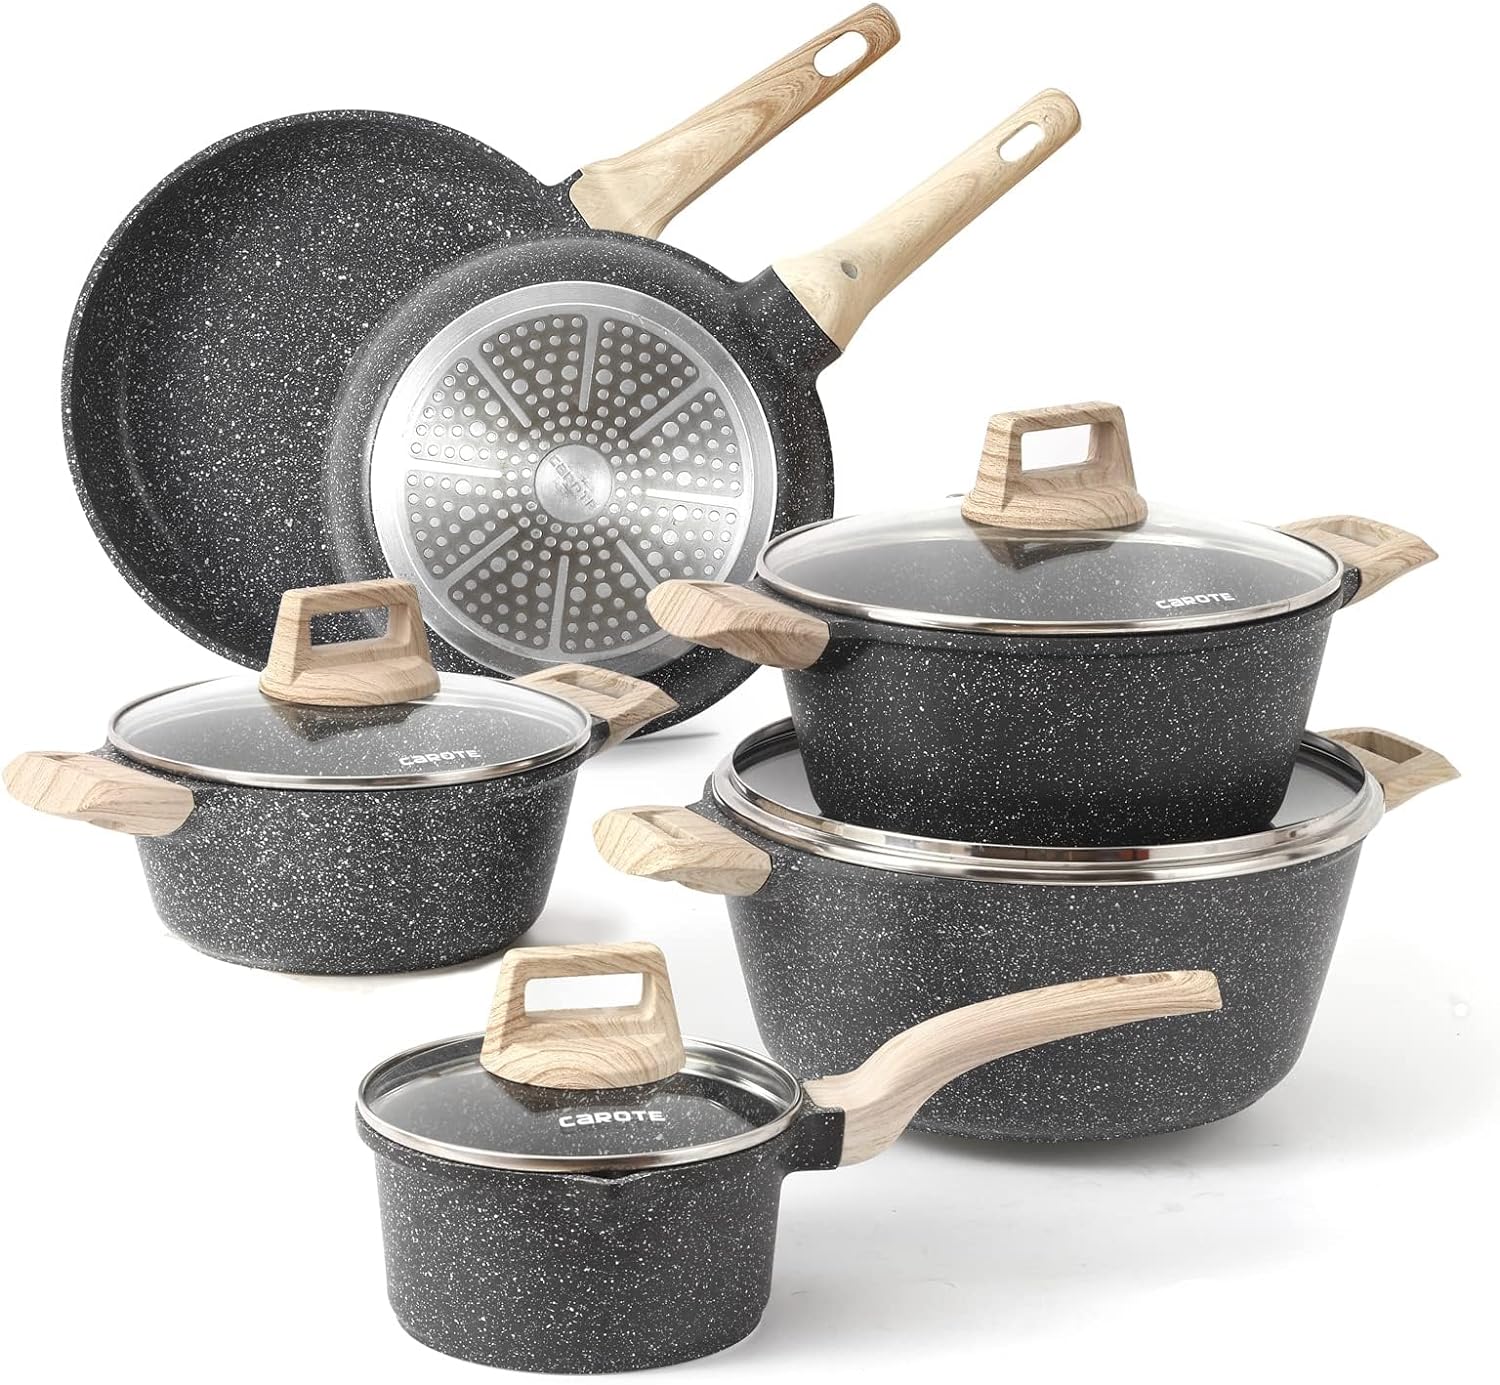 Cookware Nonstick Granite Stone: Elevate Your Cooking Experience